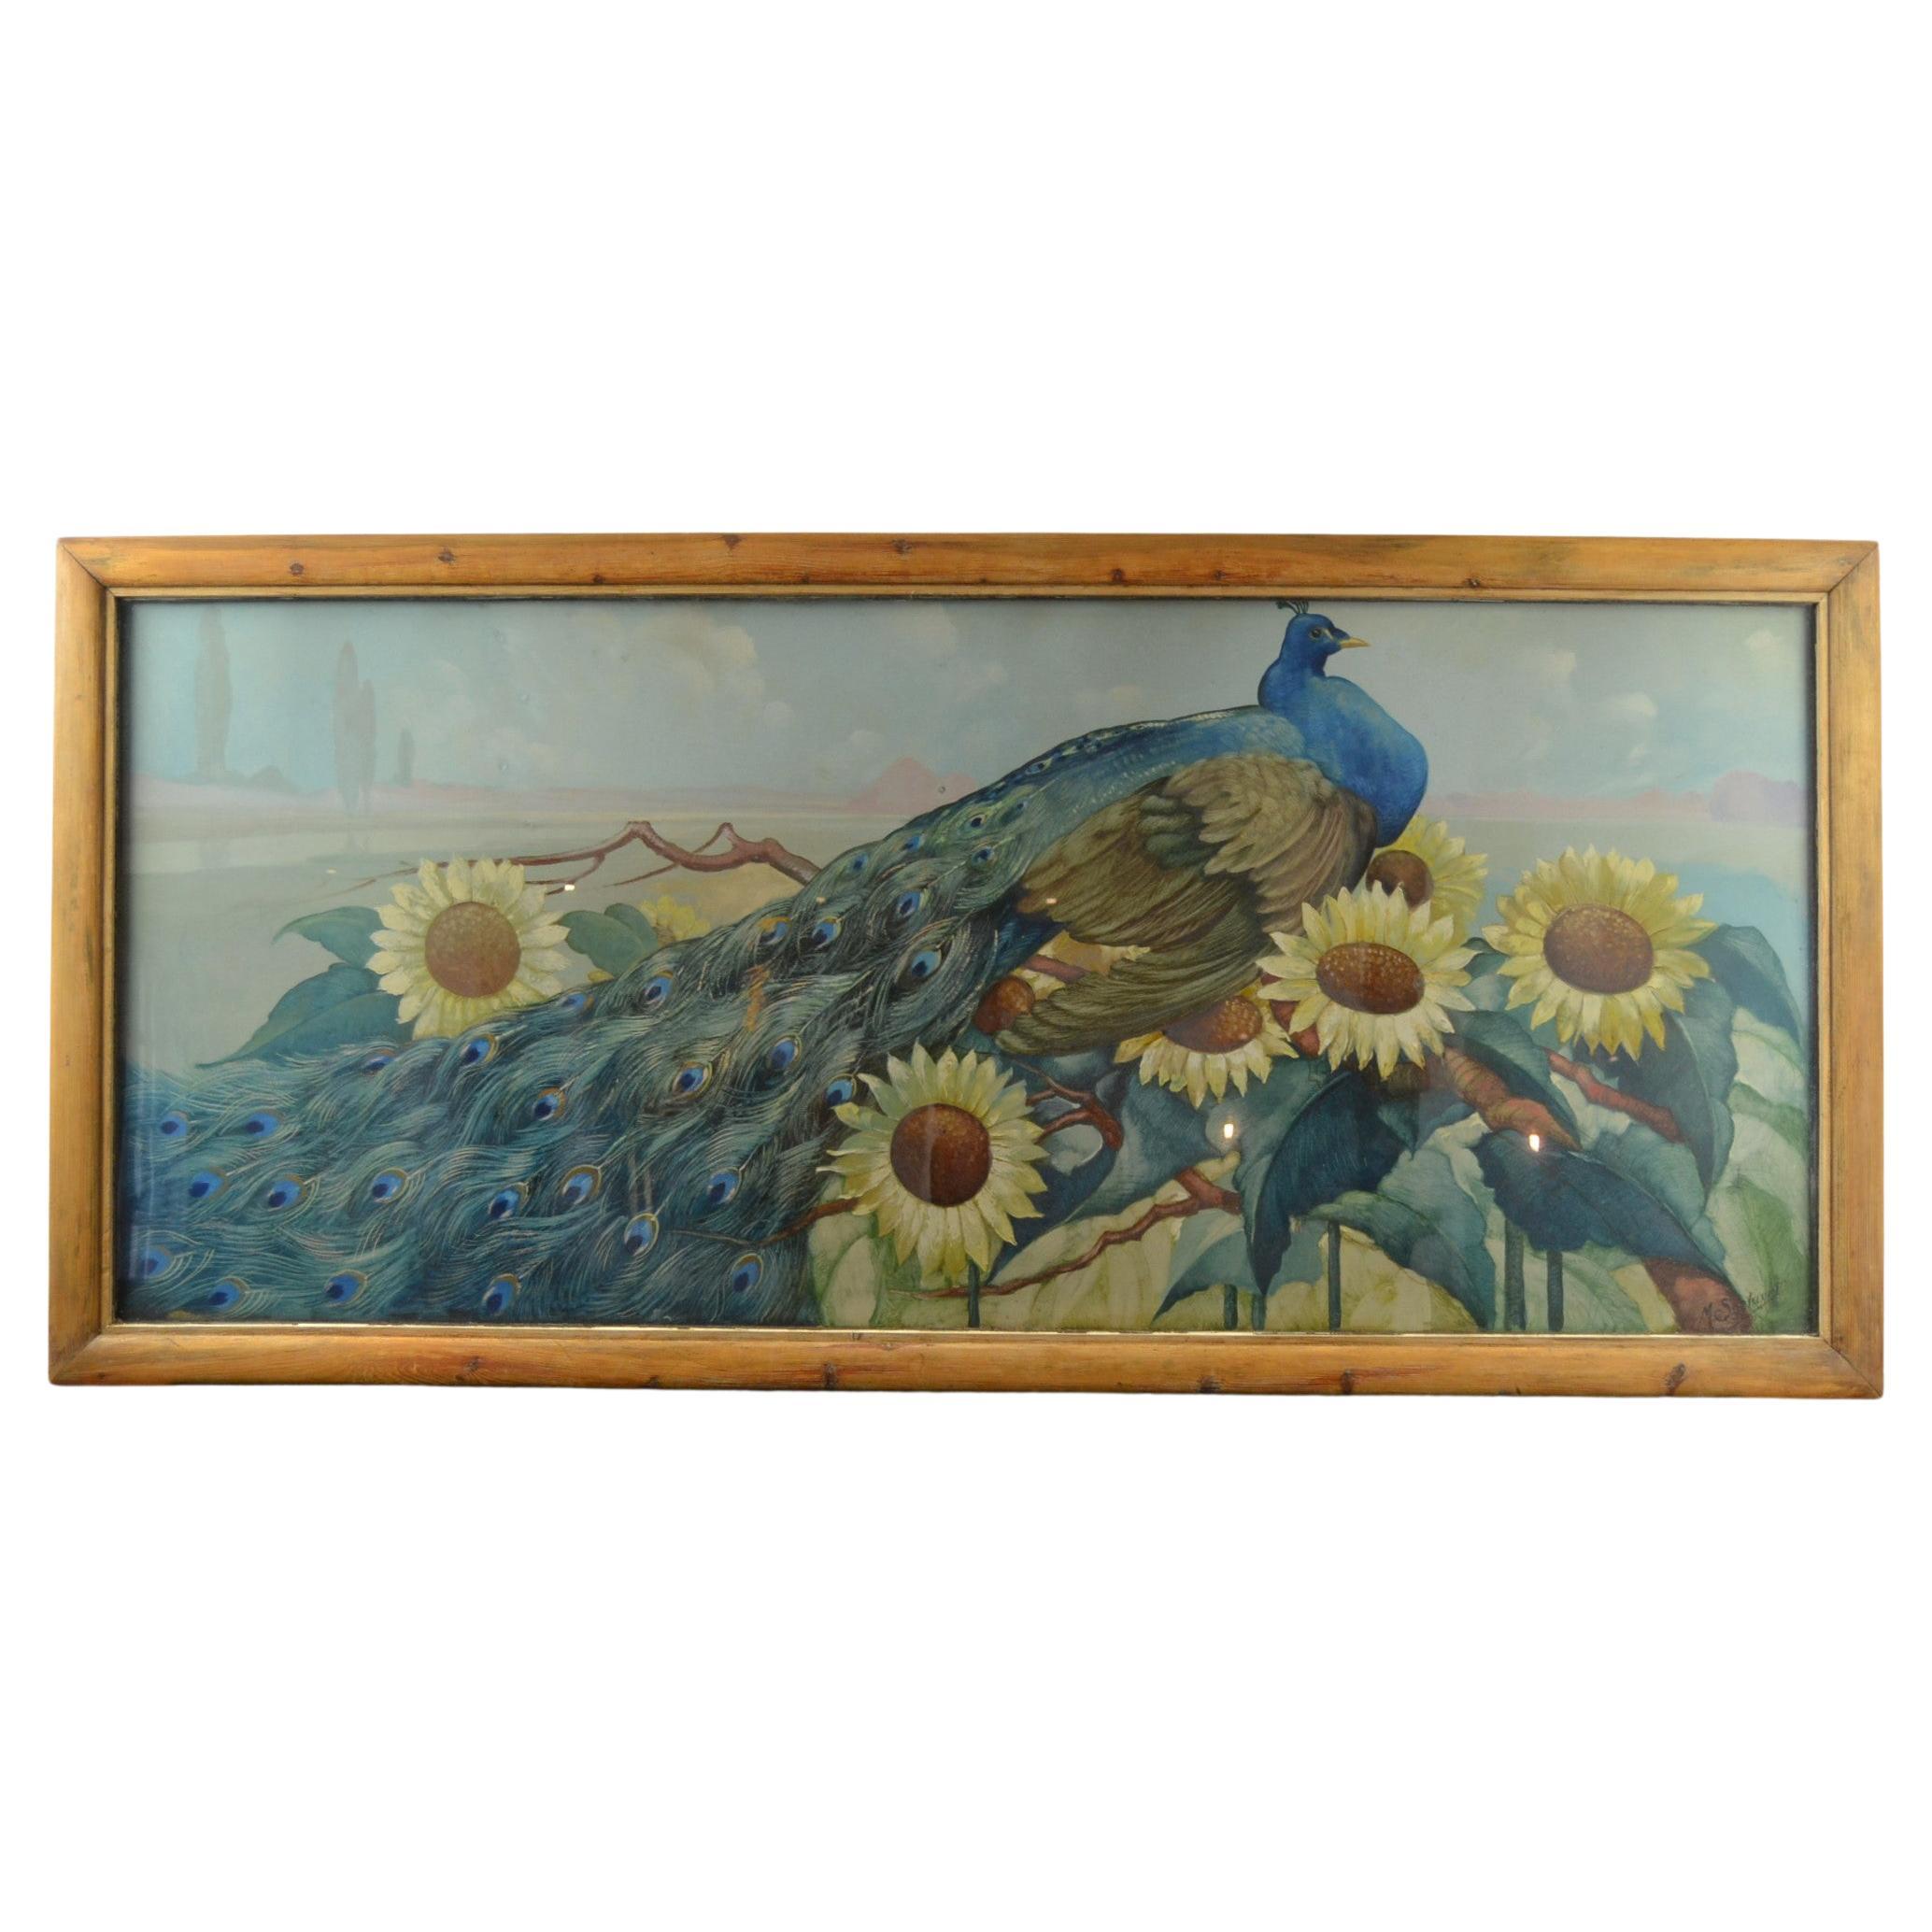 XL Framed Painting Peacock and Sunflowers by M.Soetaert